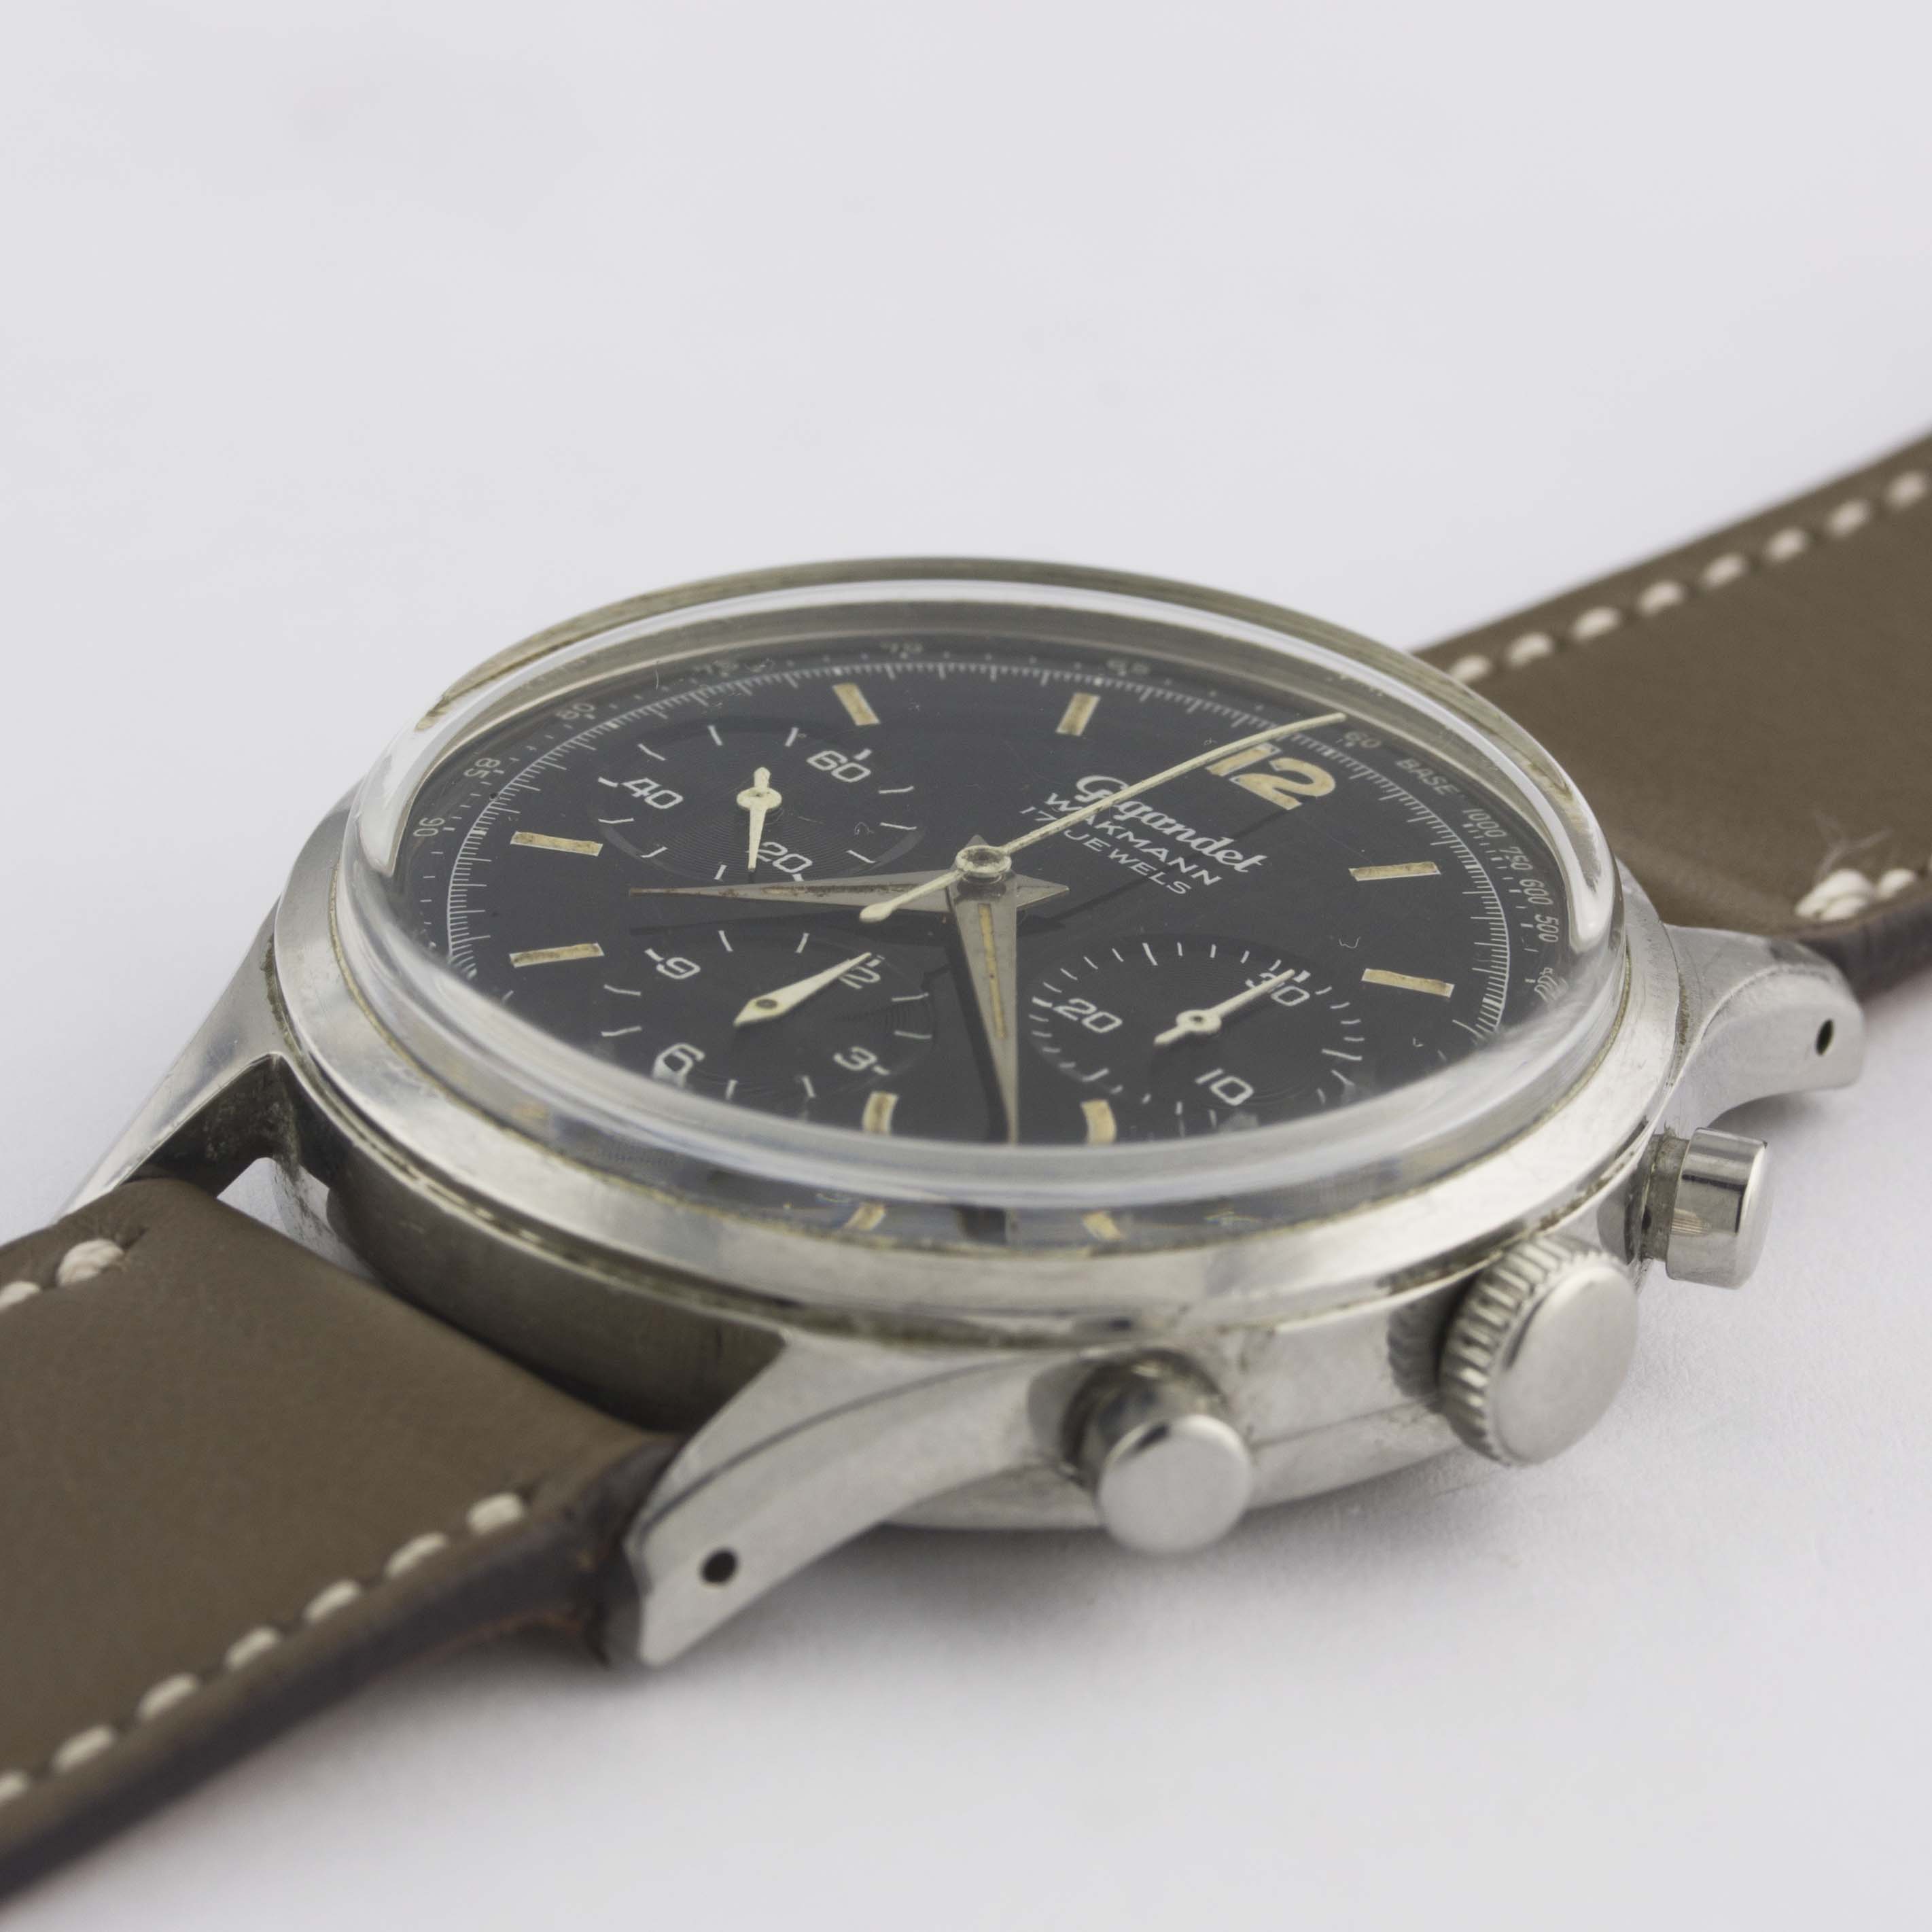 A RARE GENTLEMAN'S STAINLESS STEEL GIGANDET WAKMANN CHRONOGRAPH WRIST WATCH CIRCA 1960s, WITH - Image 3 of 10